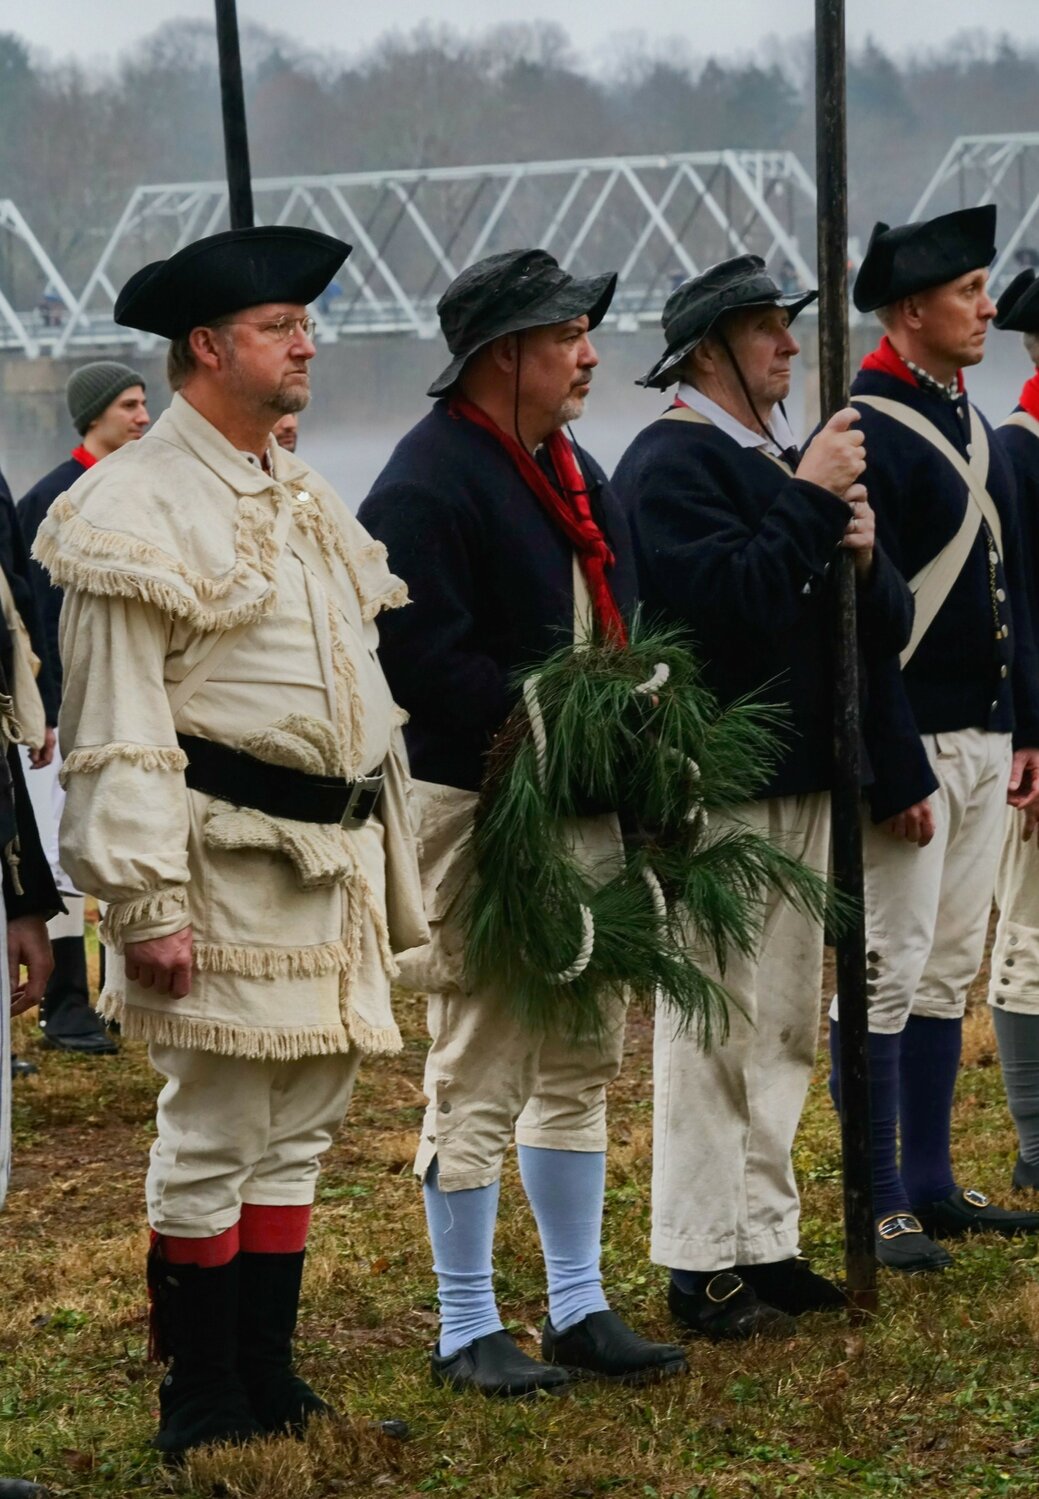 Reenactors stand at attention.